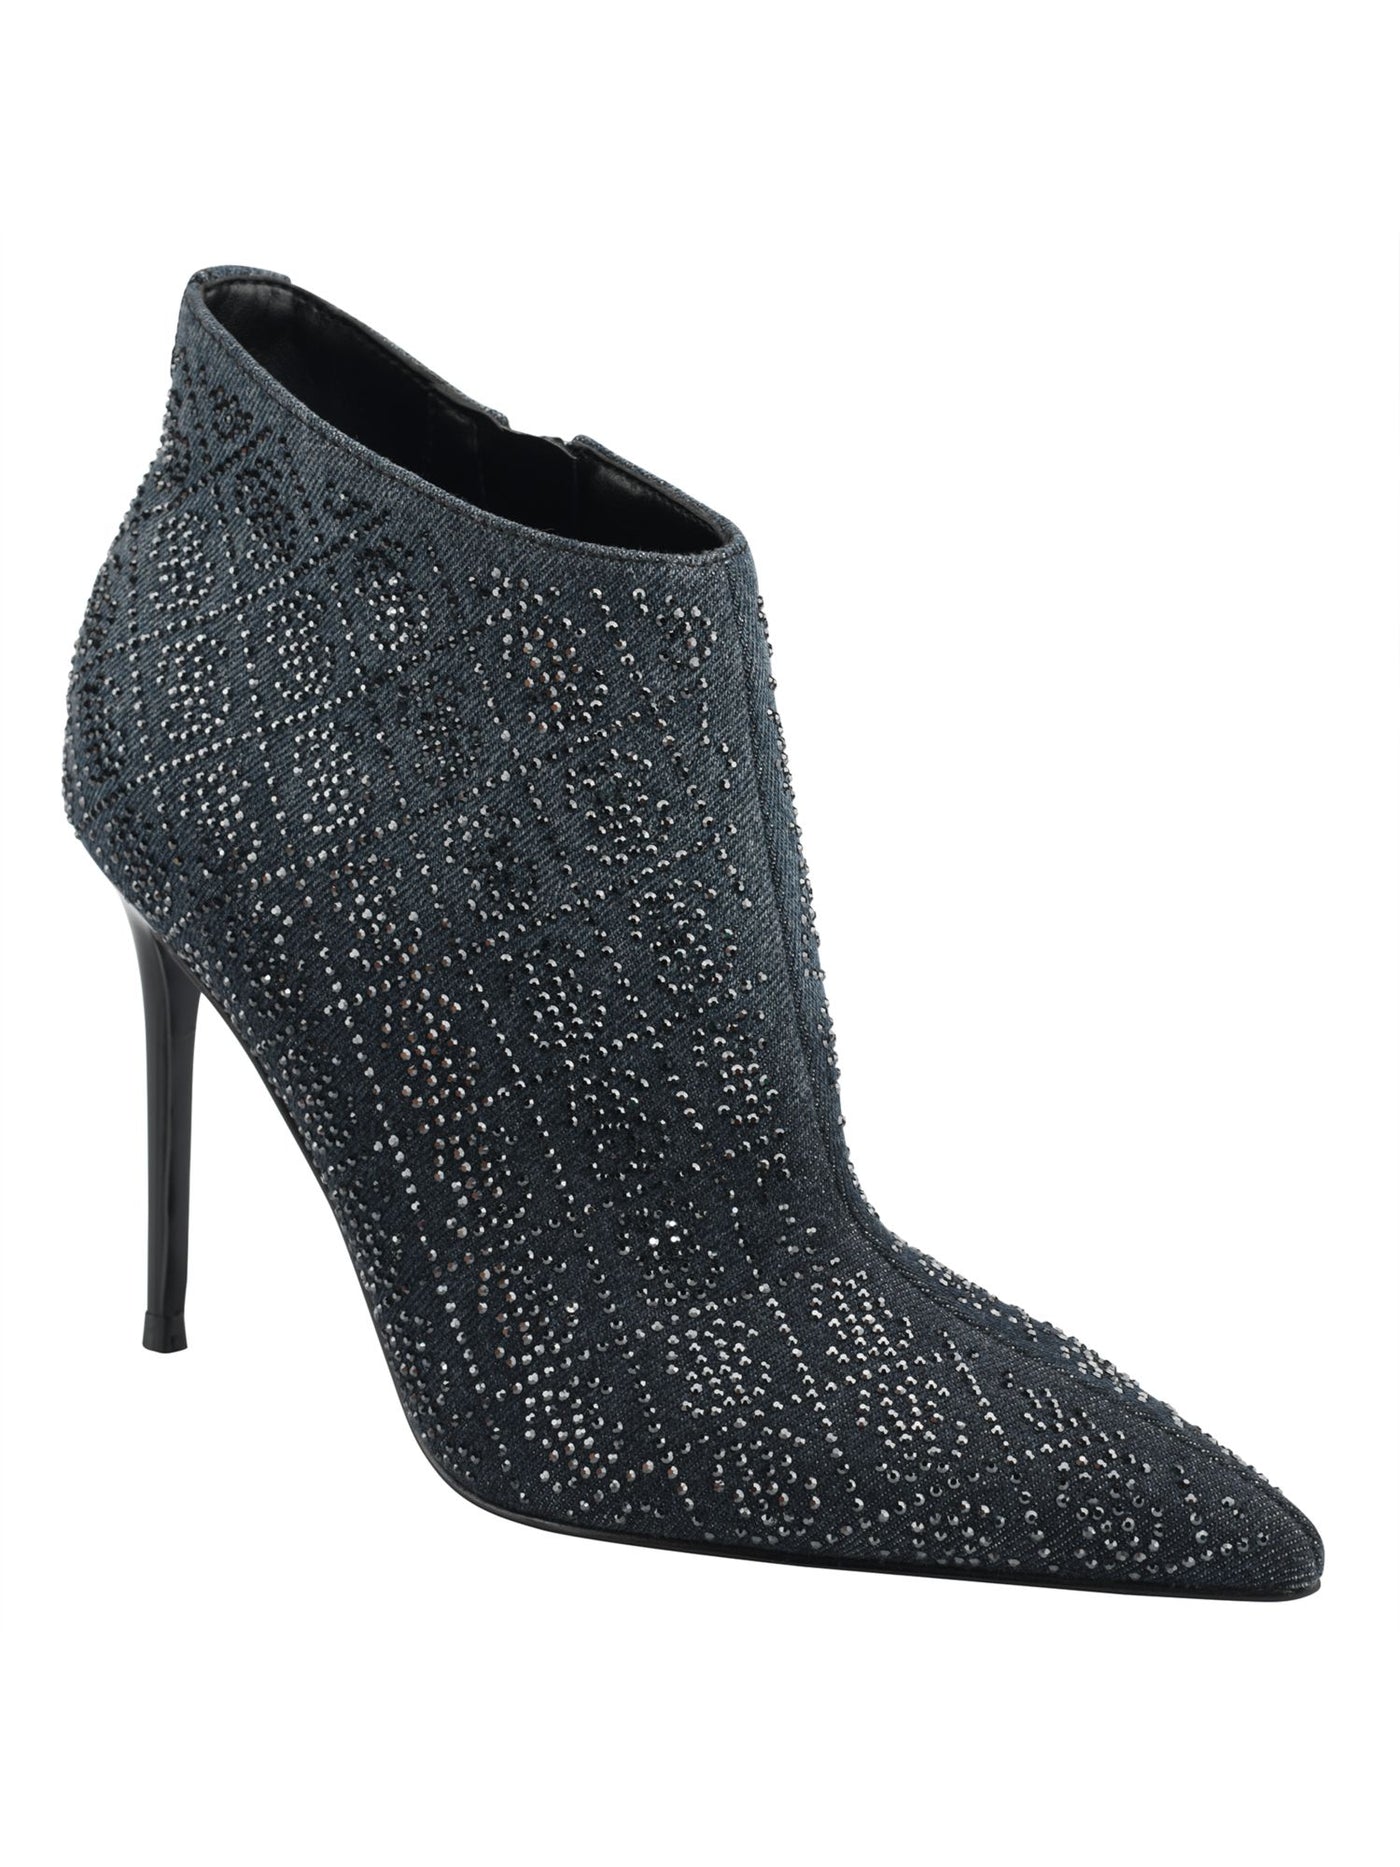 GUESS Womens Navy Embellished Comfort Fazzie Pointed Toe Stiletto Zip-Up Dress Booties 9.5 M